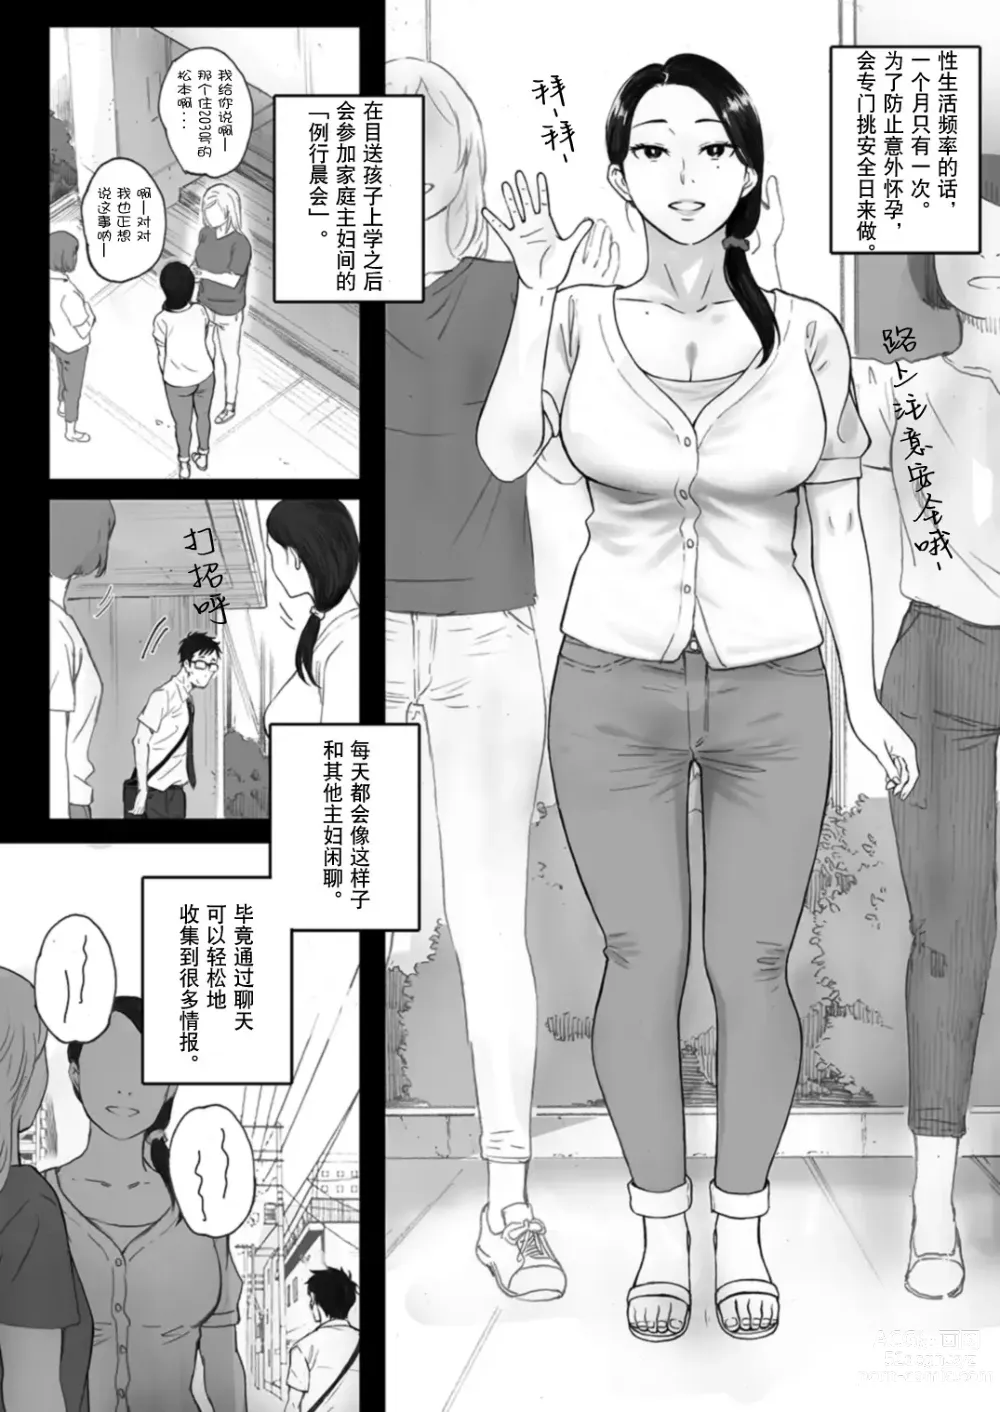 Page 3 of doujinshi 706 rooms